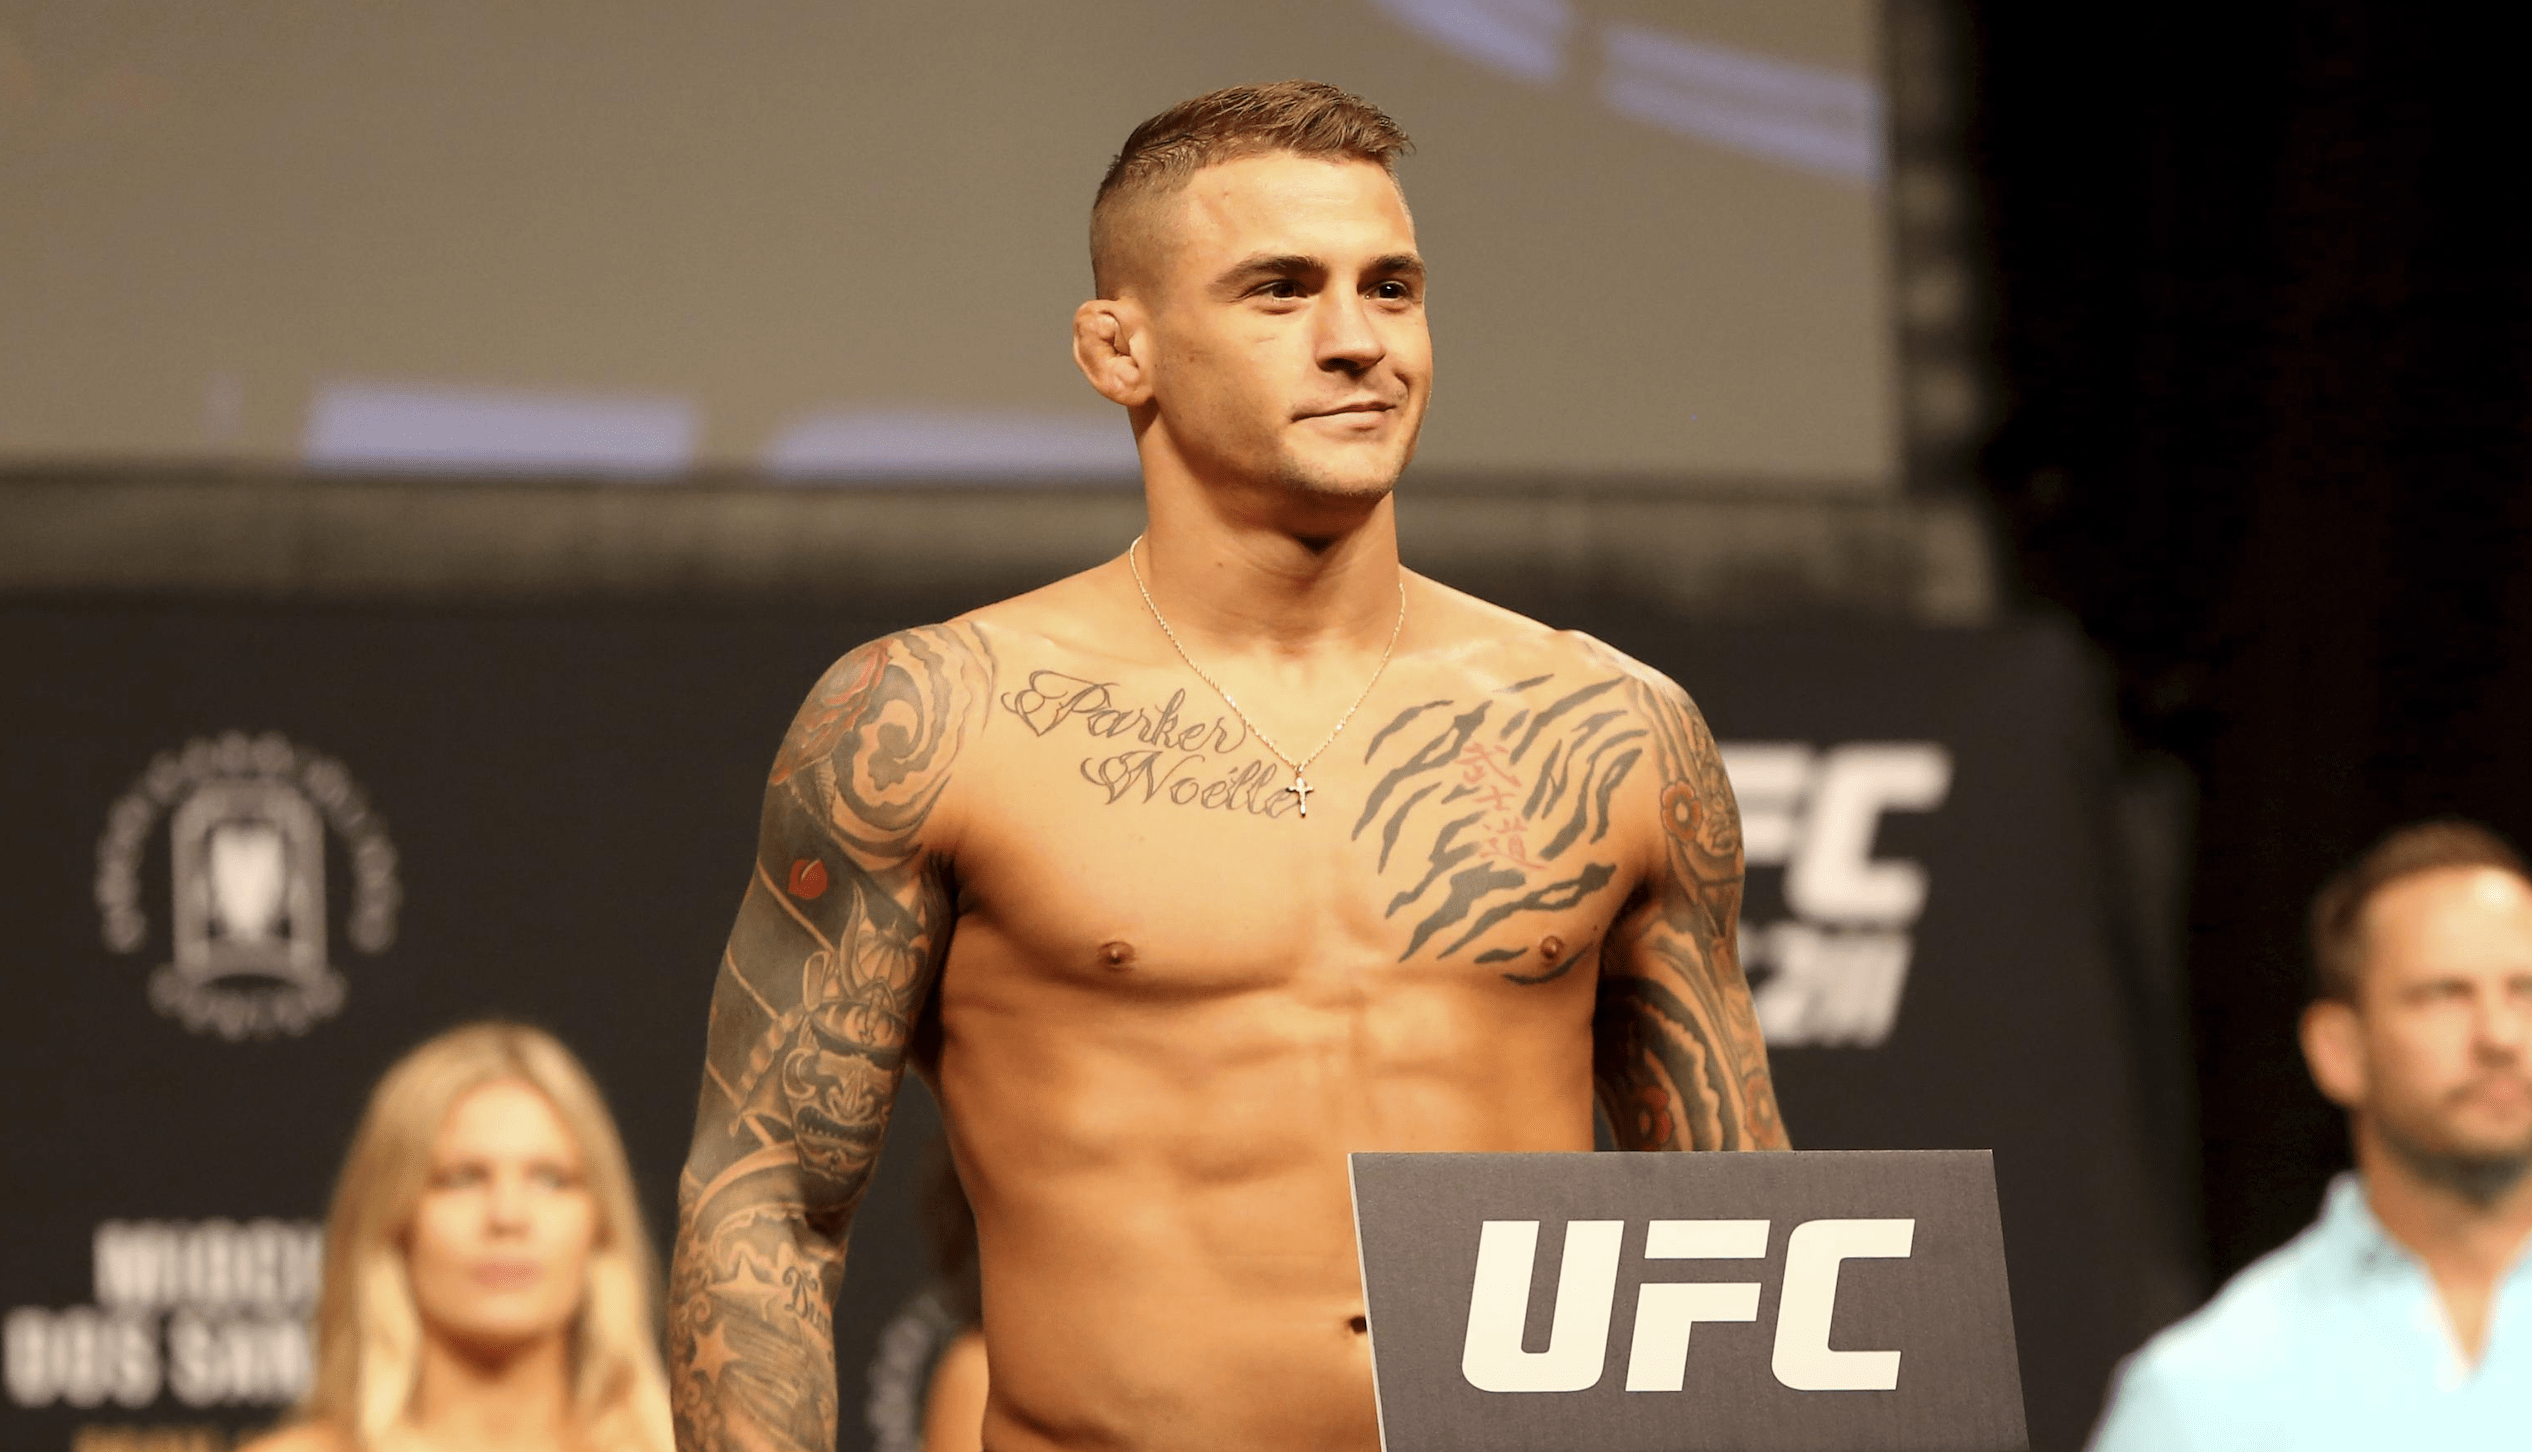 UFC: Dustin Poirier Is Only Interested In Big Names Or Title Shots